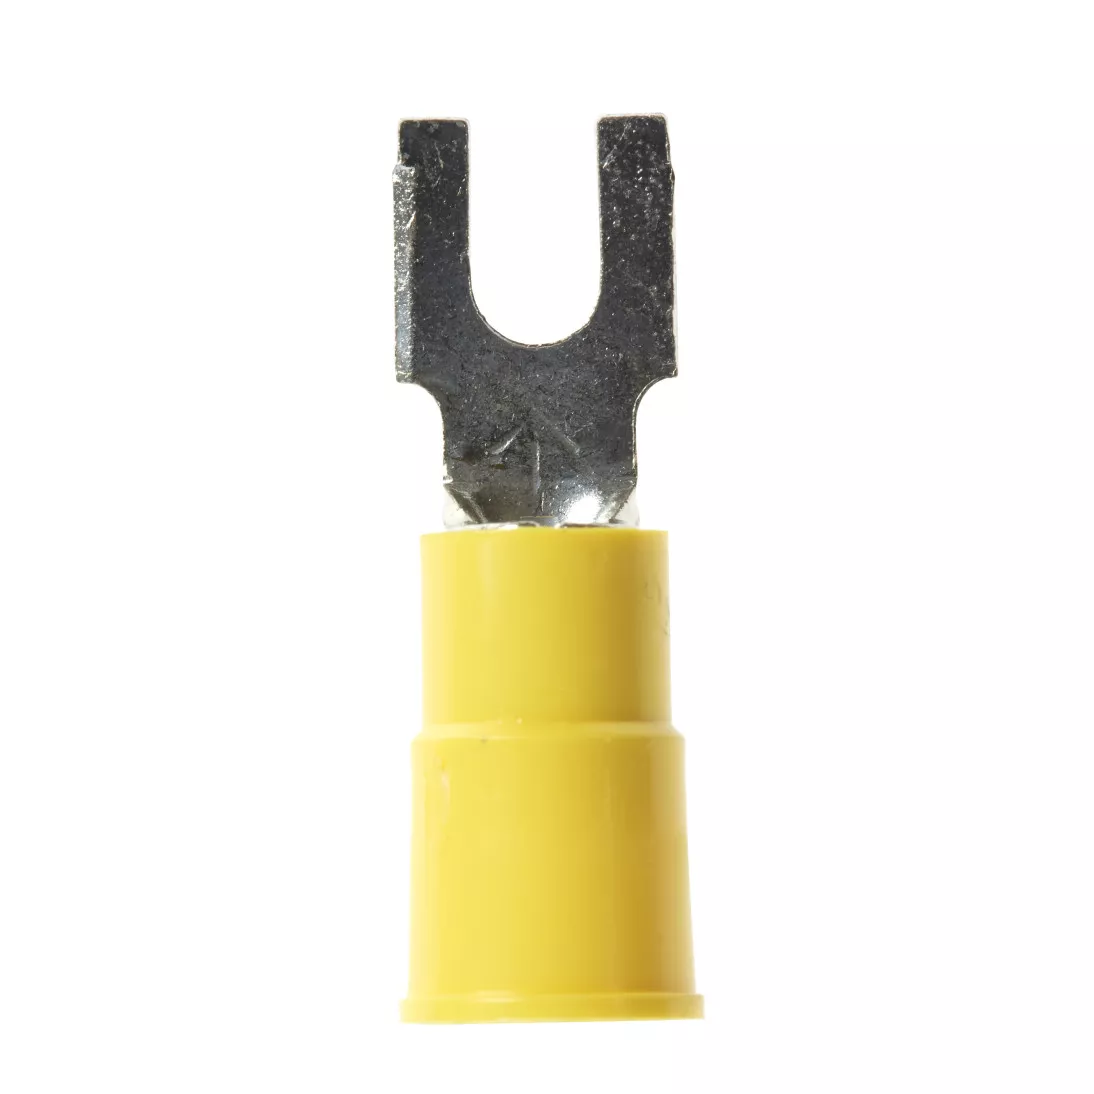 3M™ Scotchlok™ Block Fork, Vinyl Insulated Butted Seam MVU10-6FBK, Stud
Size 6, suitable for use in a terminal block, 500/Case